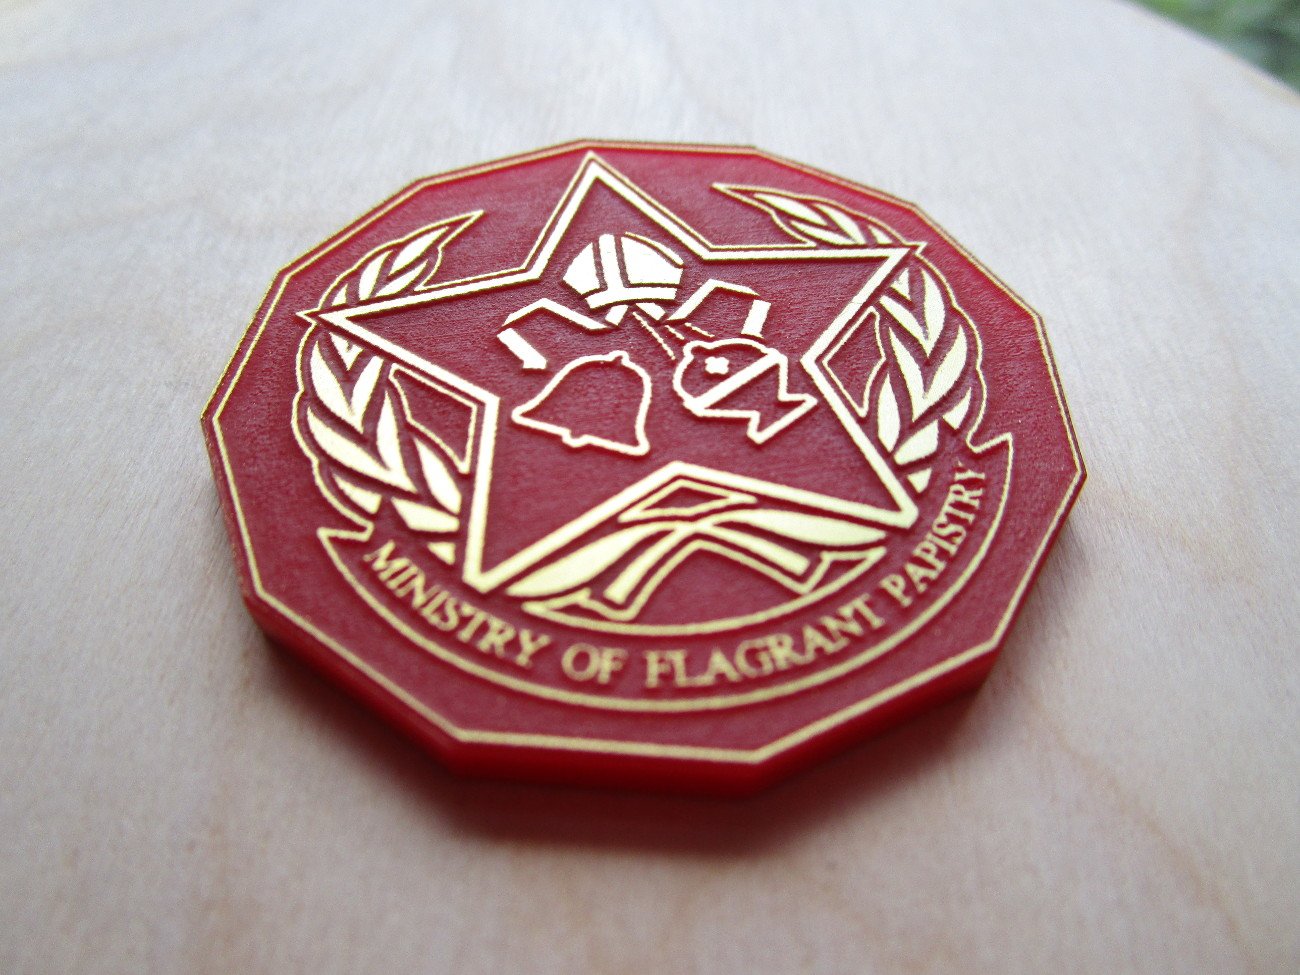 Image of "Ministry of Flagrant Papistry" Badge